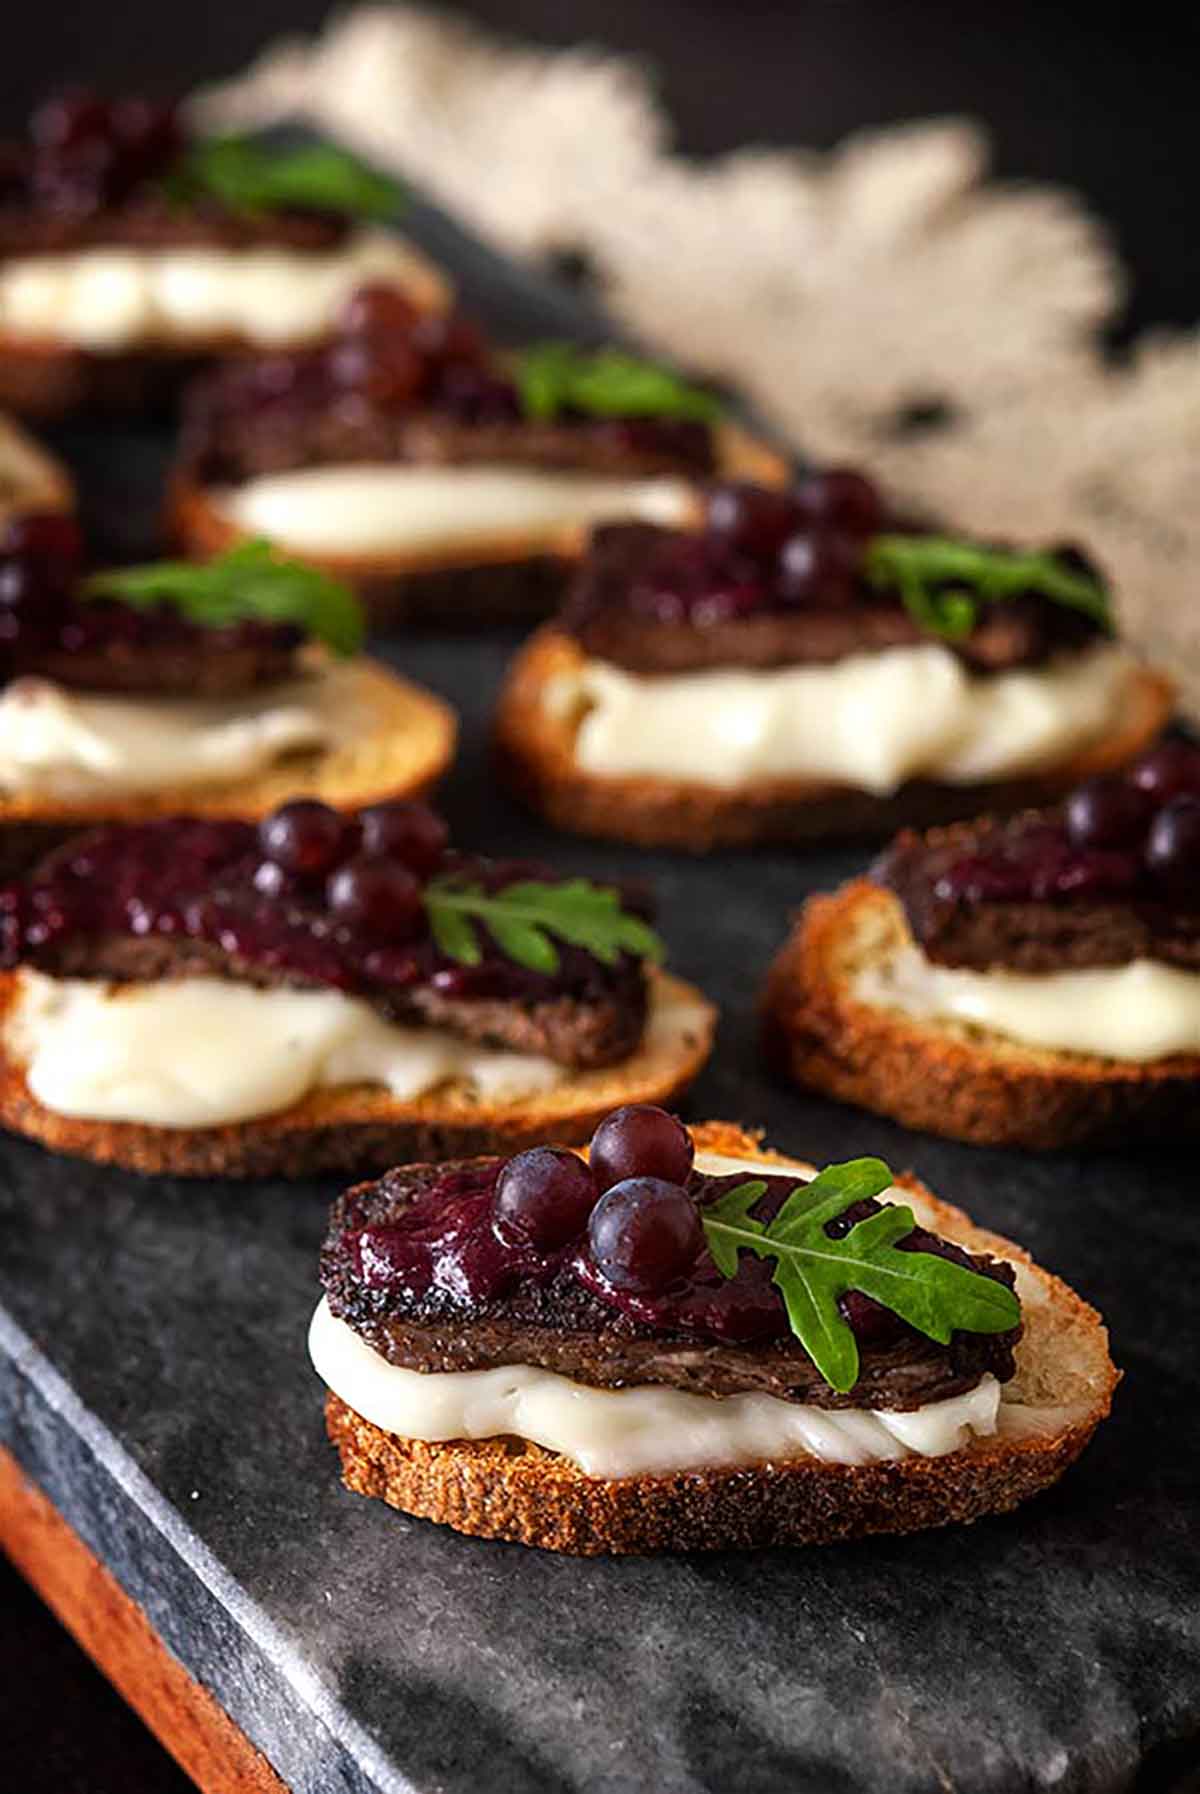 6 steak appetizers on a marble slate, garnished with tiny grapes, arugula and dripping cheese.